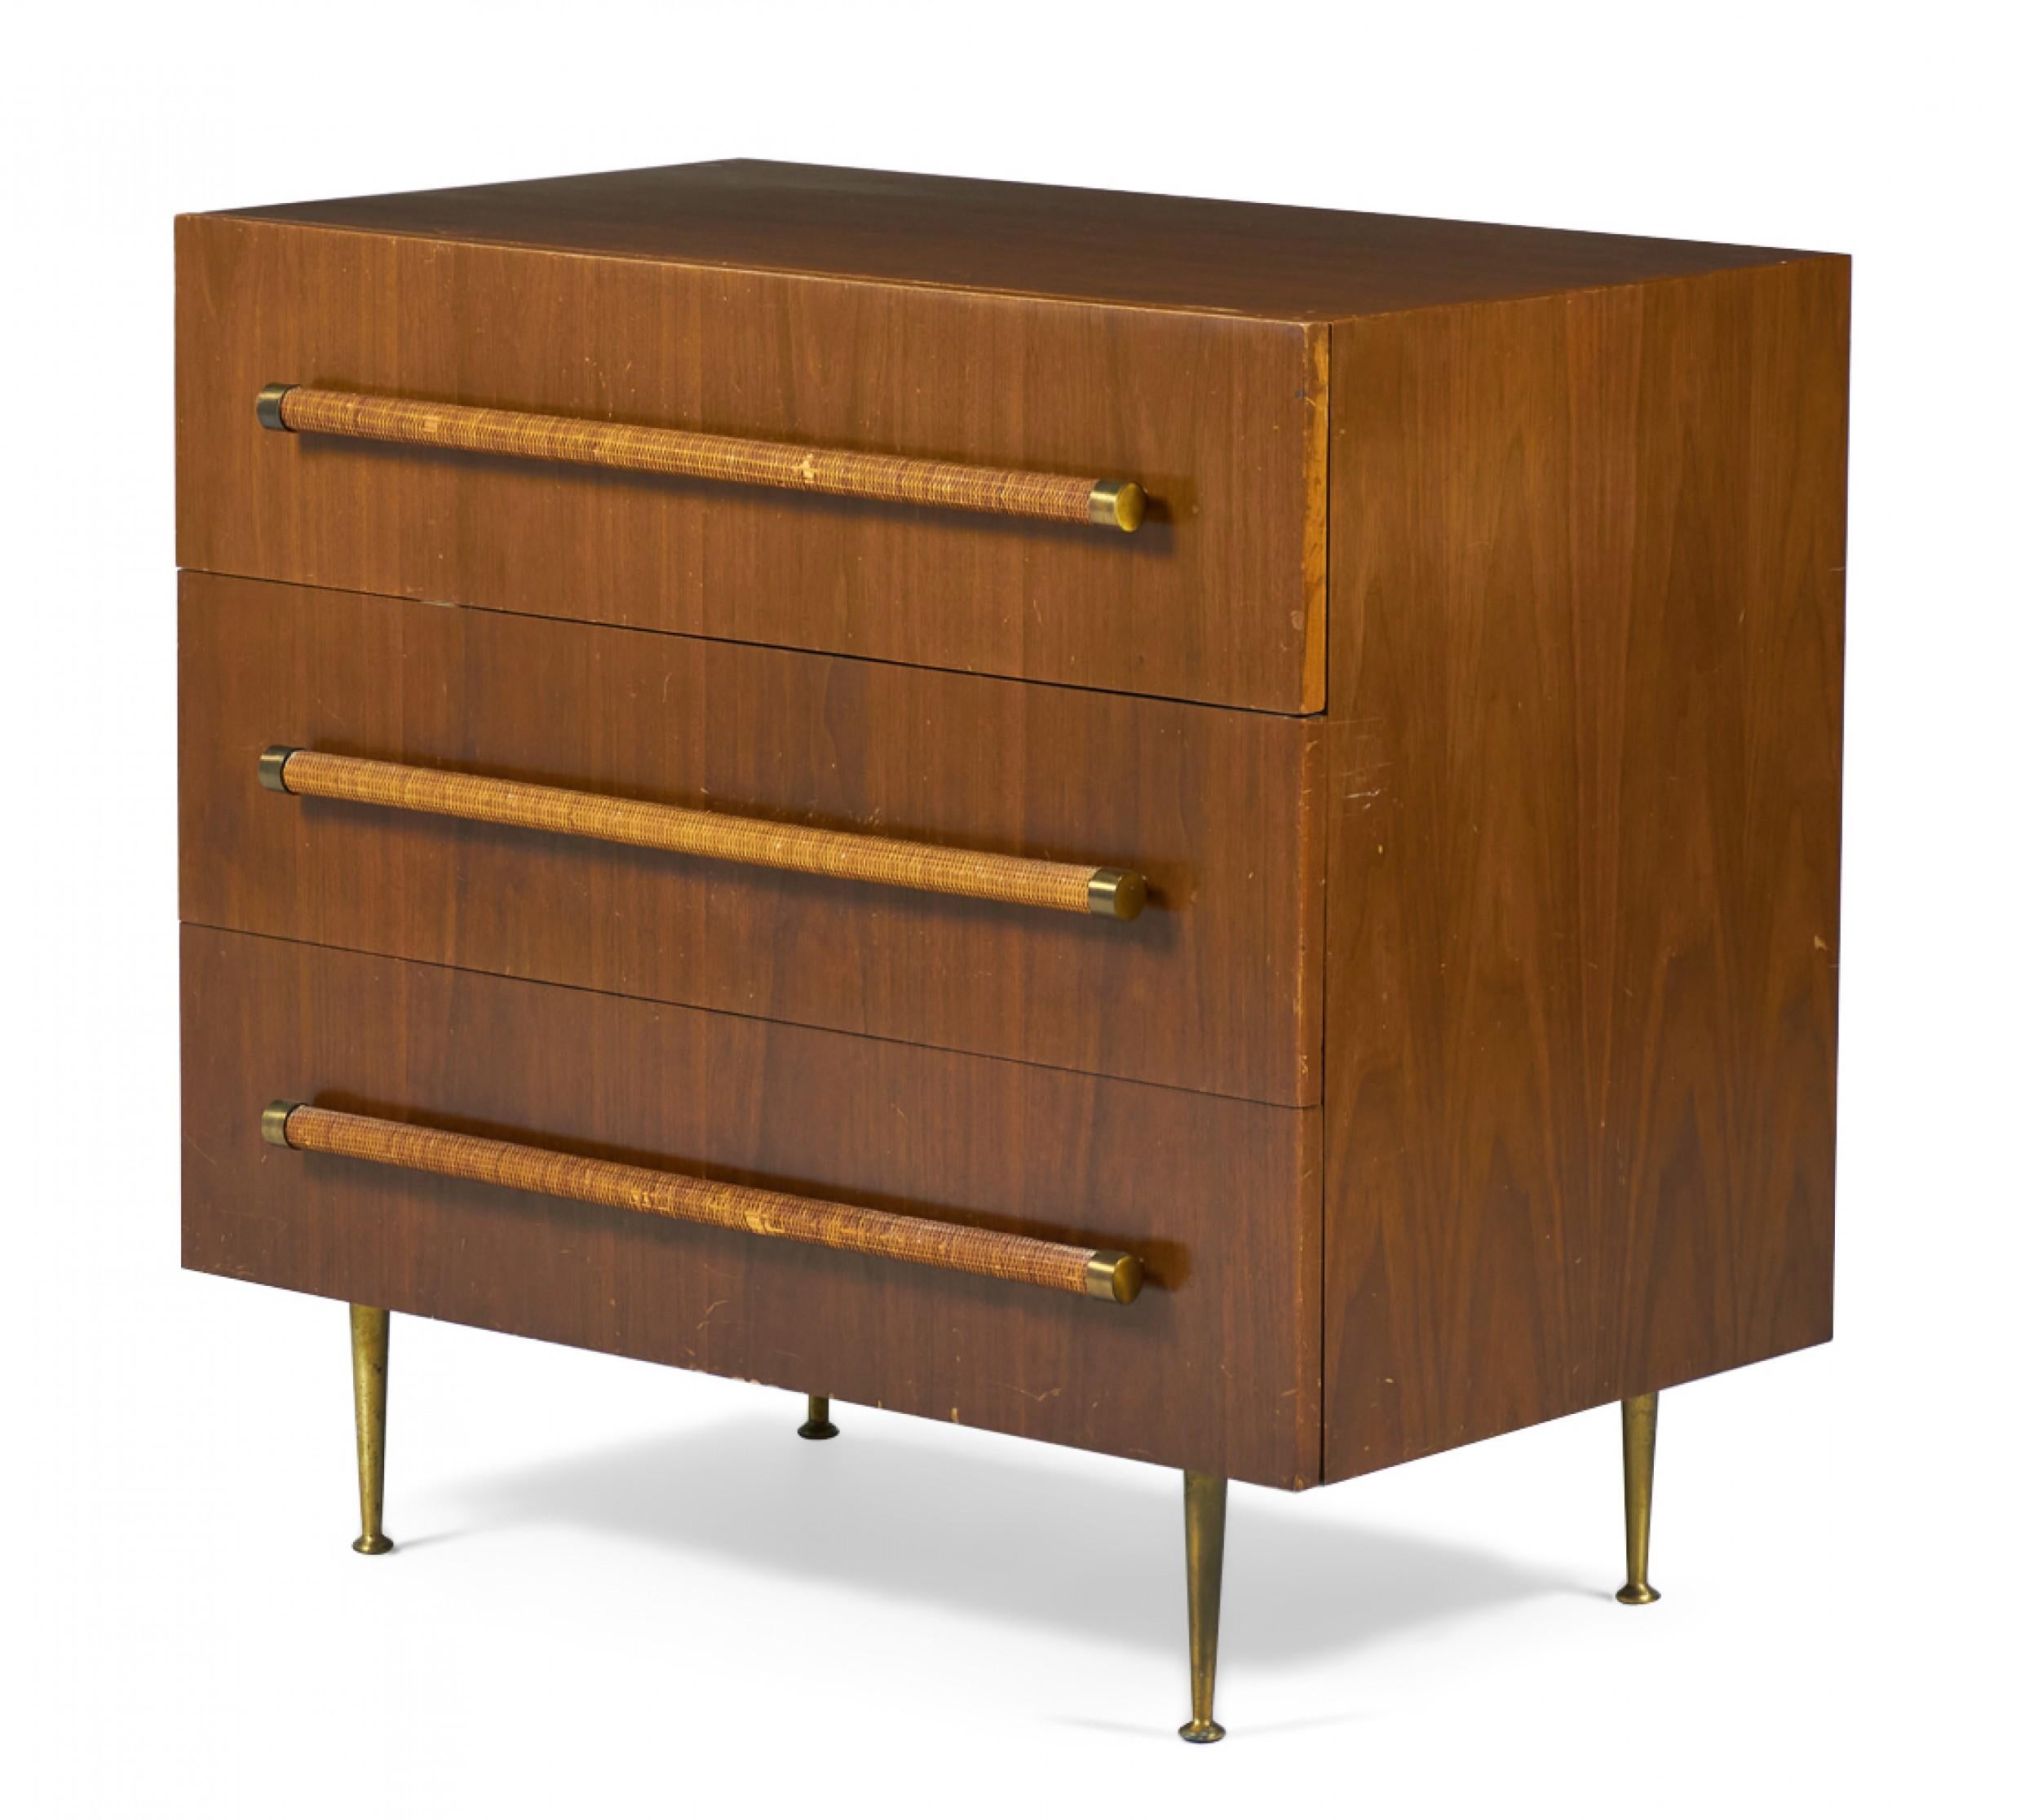 American Mid-Century (1950s) walnut three-drawer chest of drawers with rattan-wrapped dowel drawer pulls and four tapered brass legs with circular brass feet. (T.H. Robsjohn-Gibbings for Widdicomb).
    